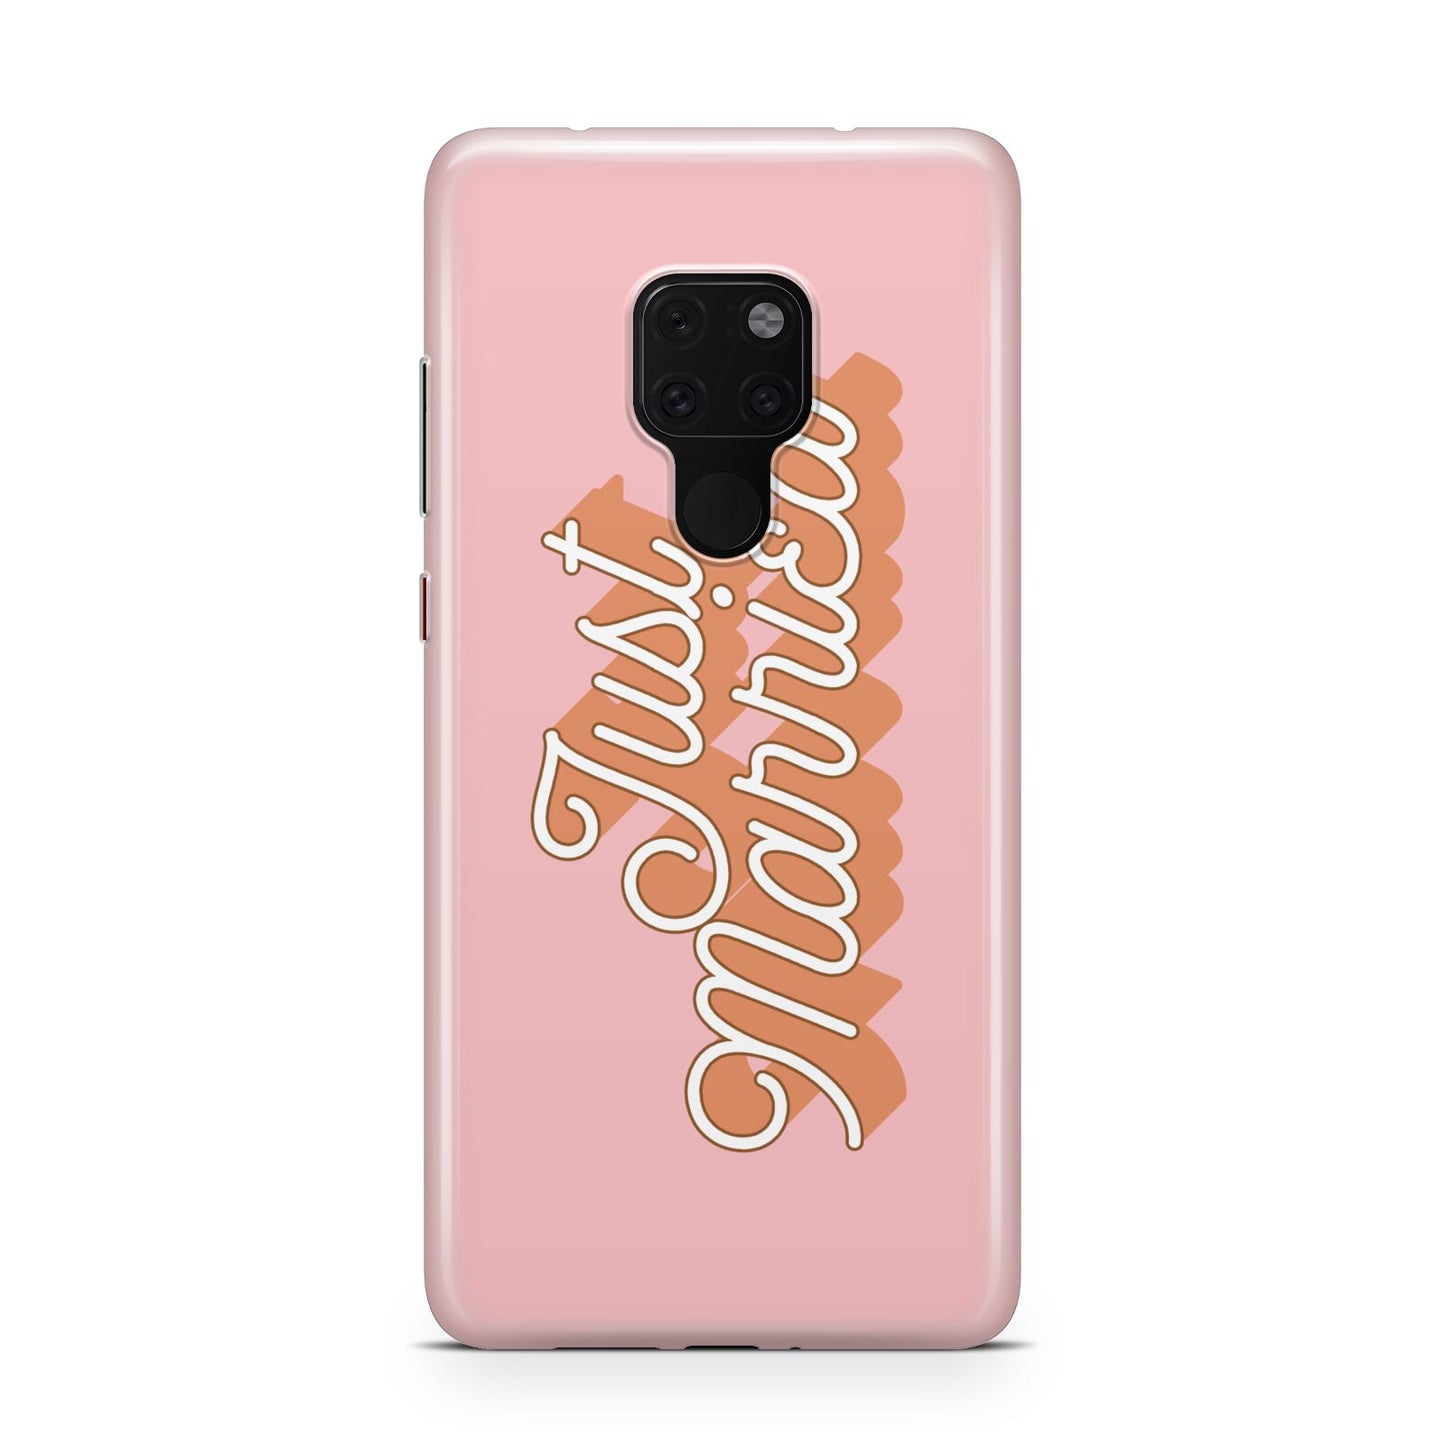 Just Married Pink Huawei Mate 20 Phone Case